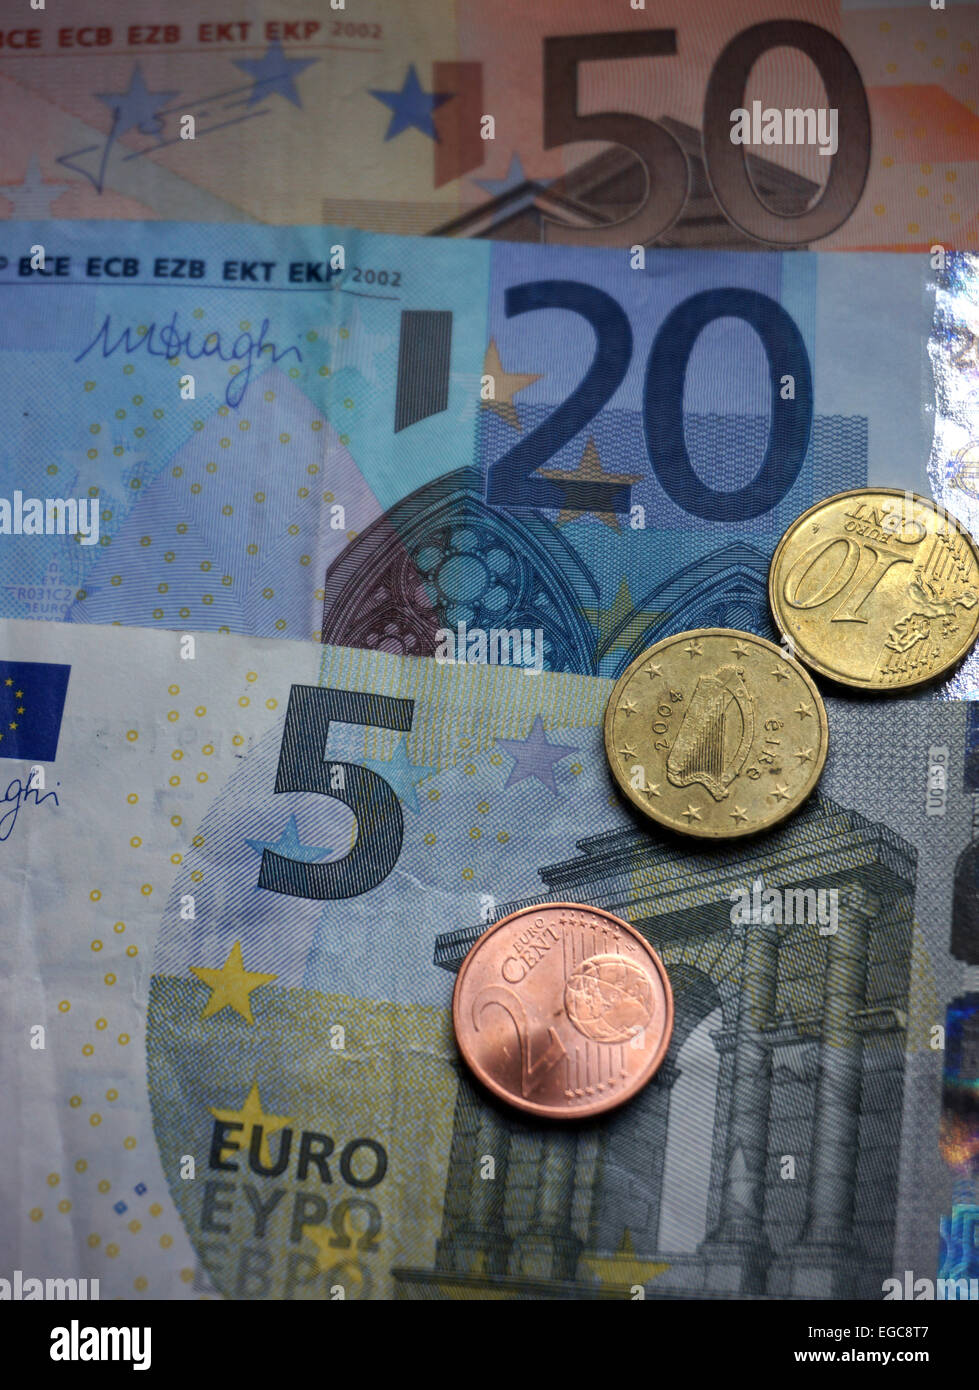 Euro currency, money, notes and coins, close-up view Stock Photo